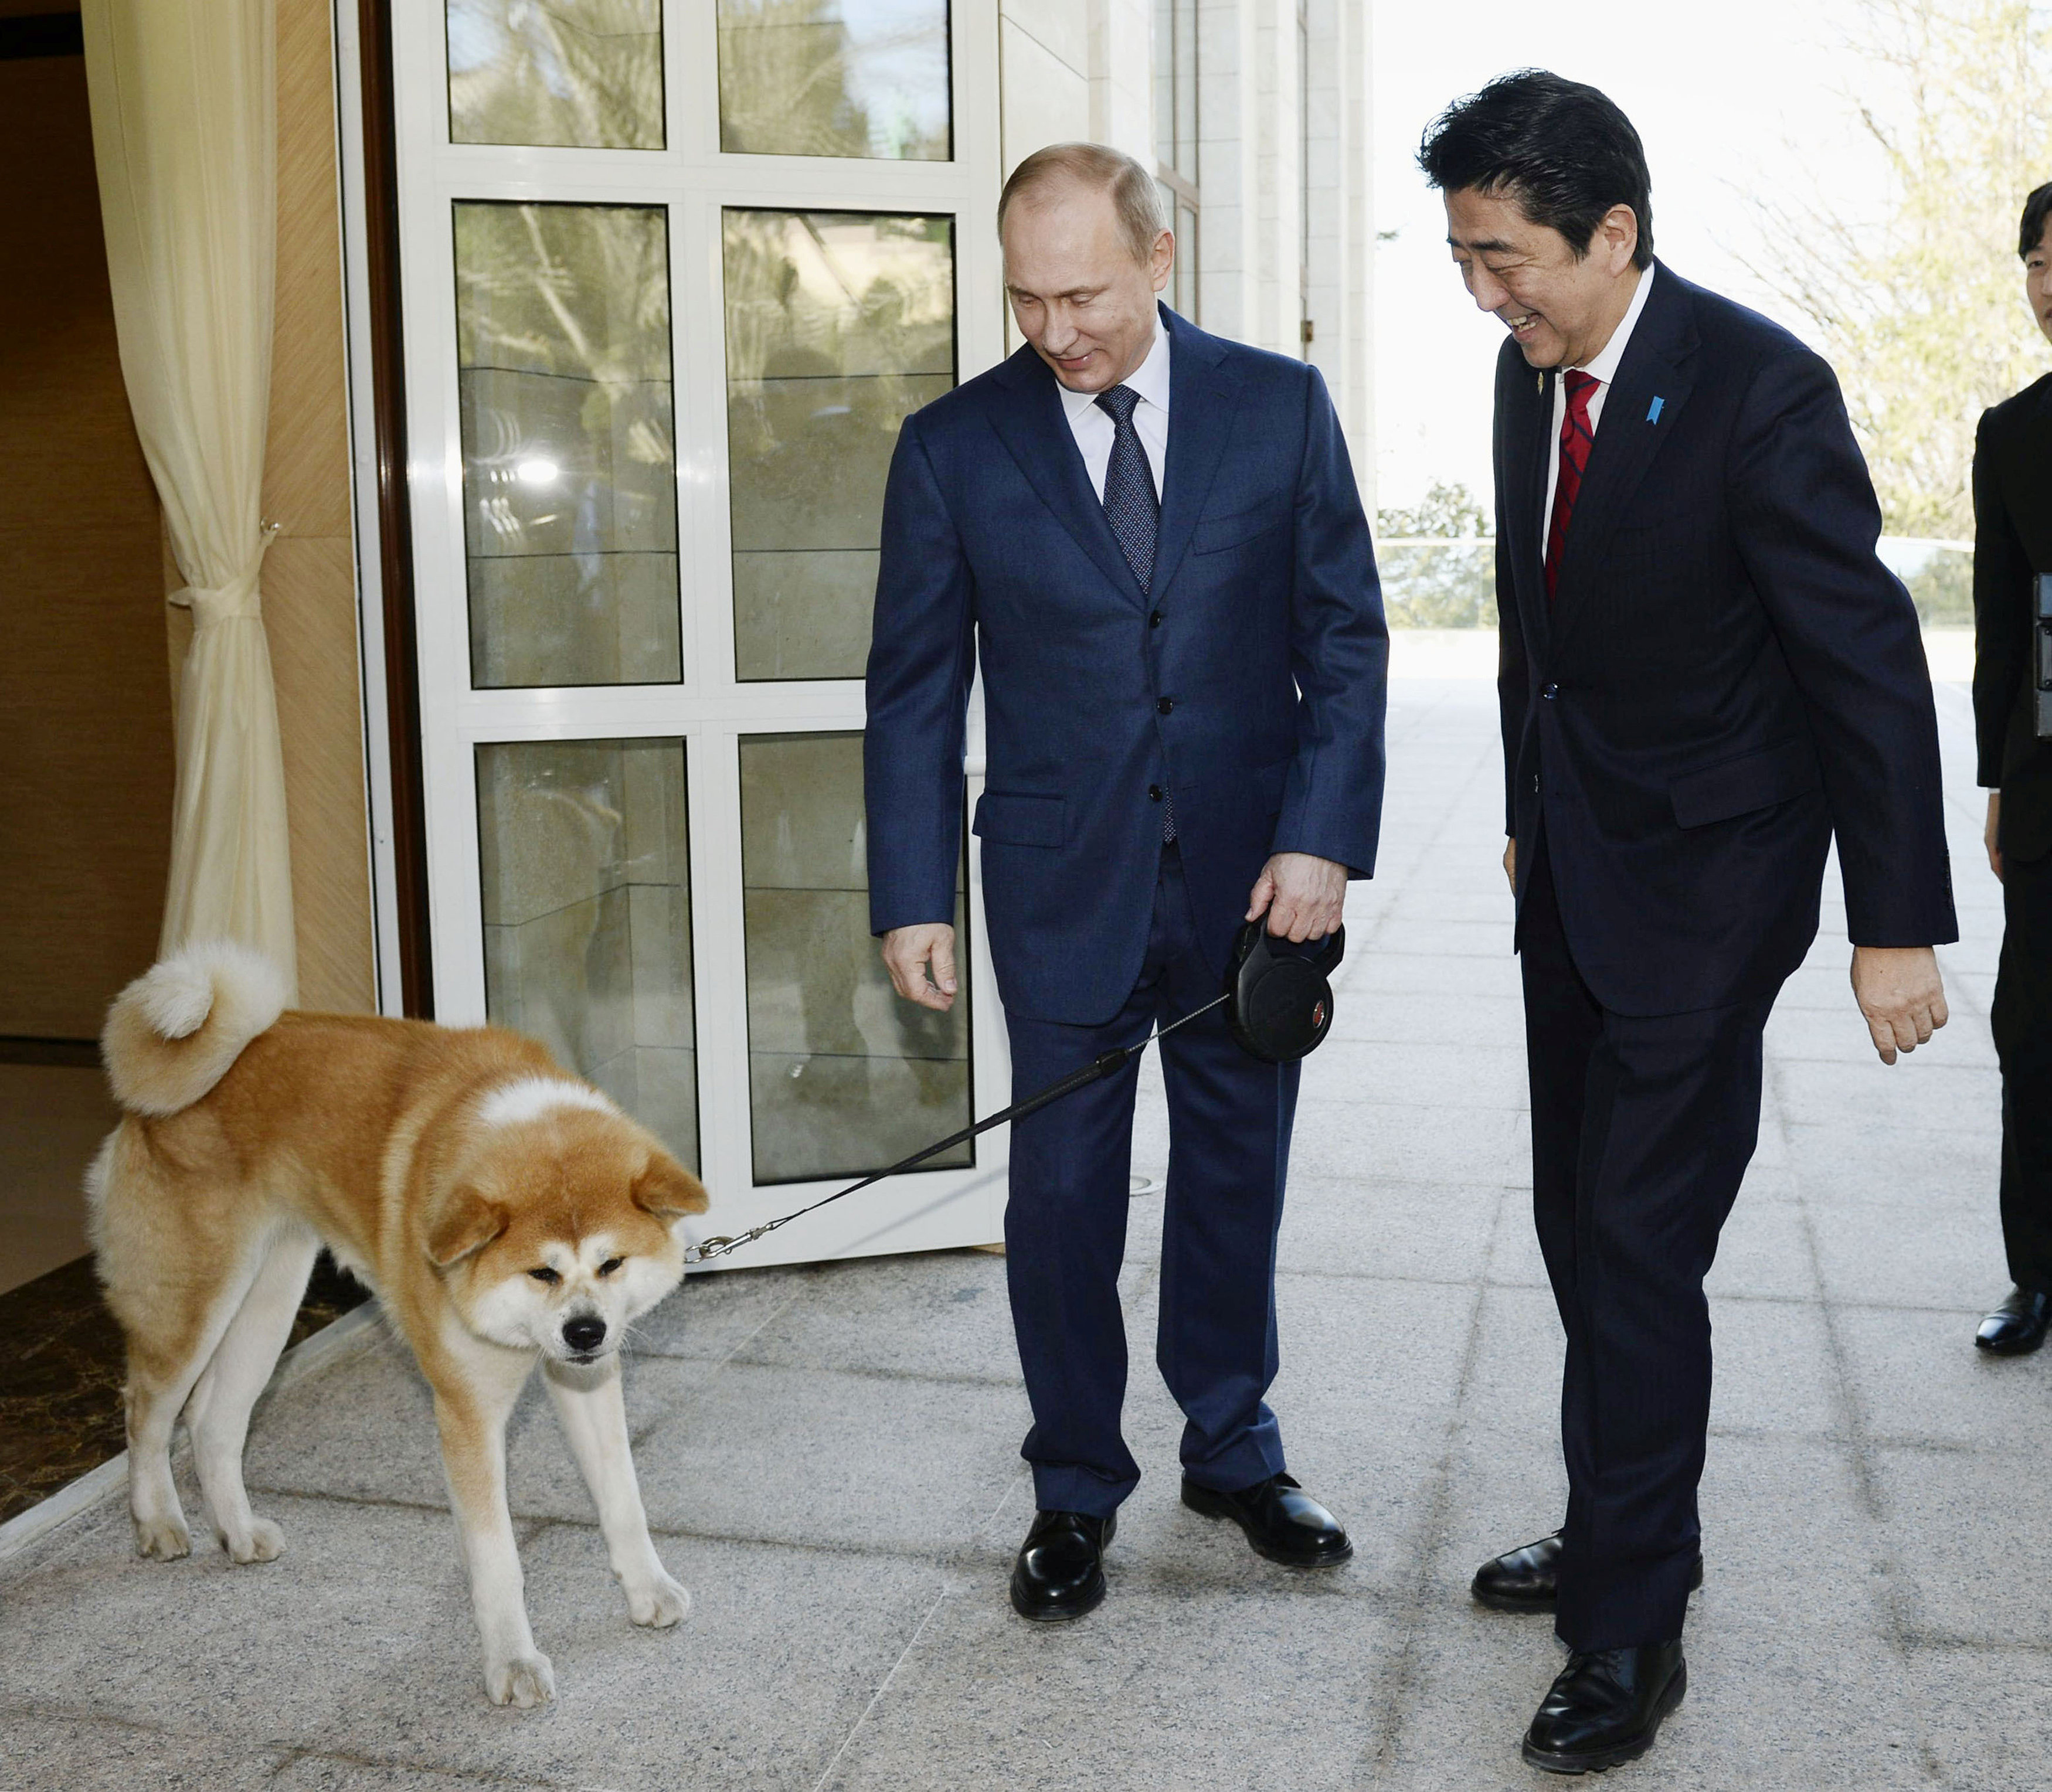 Russia declines Japanese dog diplomacy ahead of summit